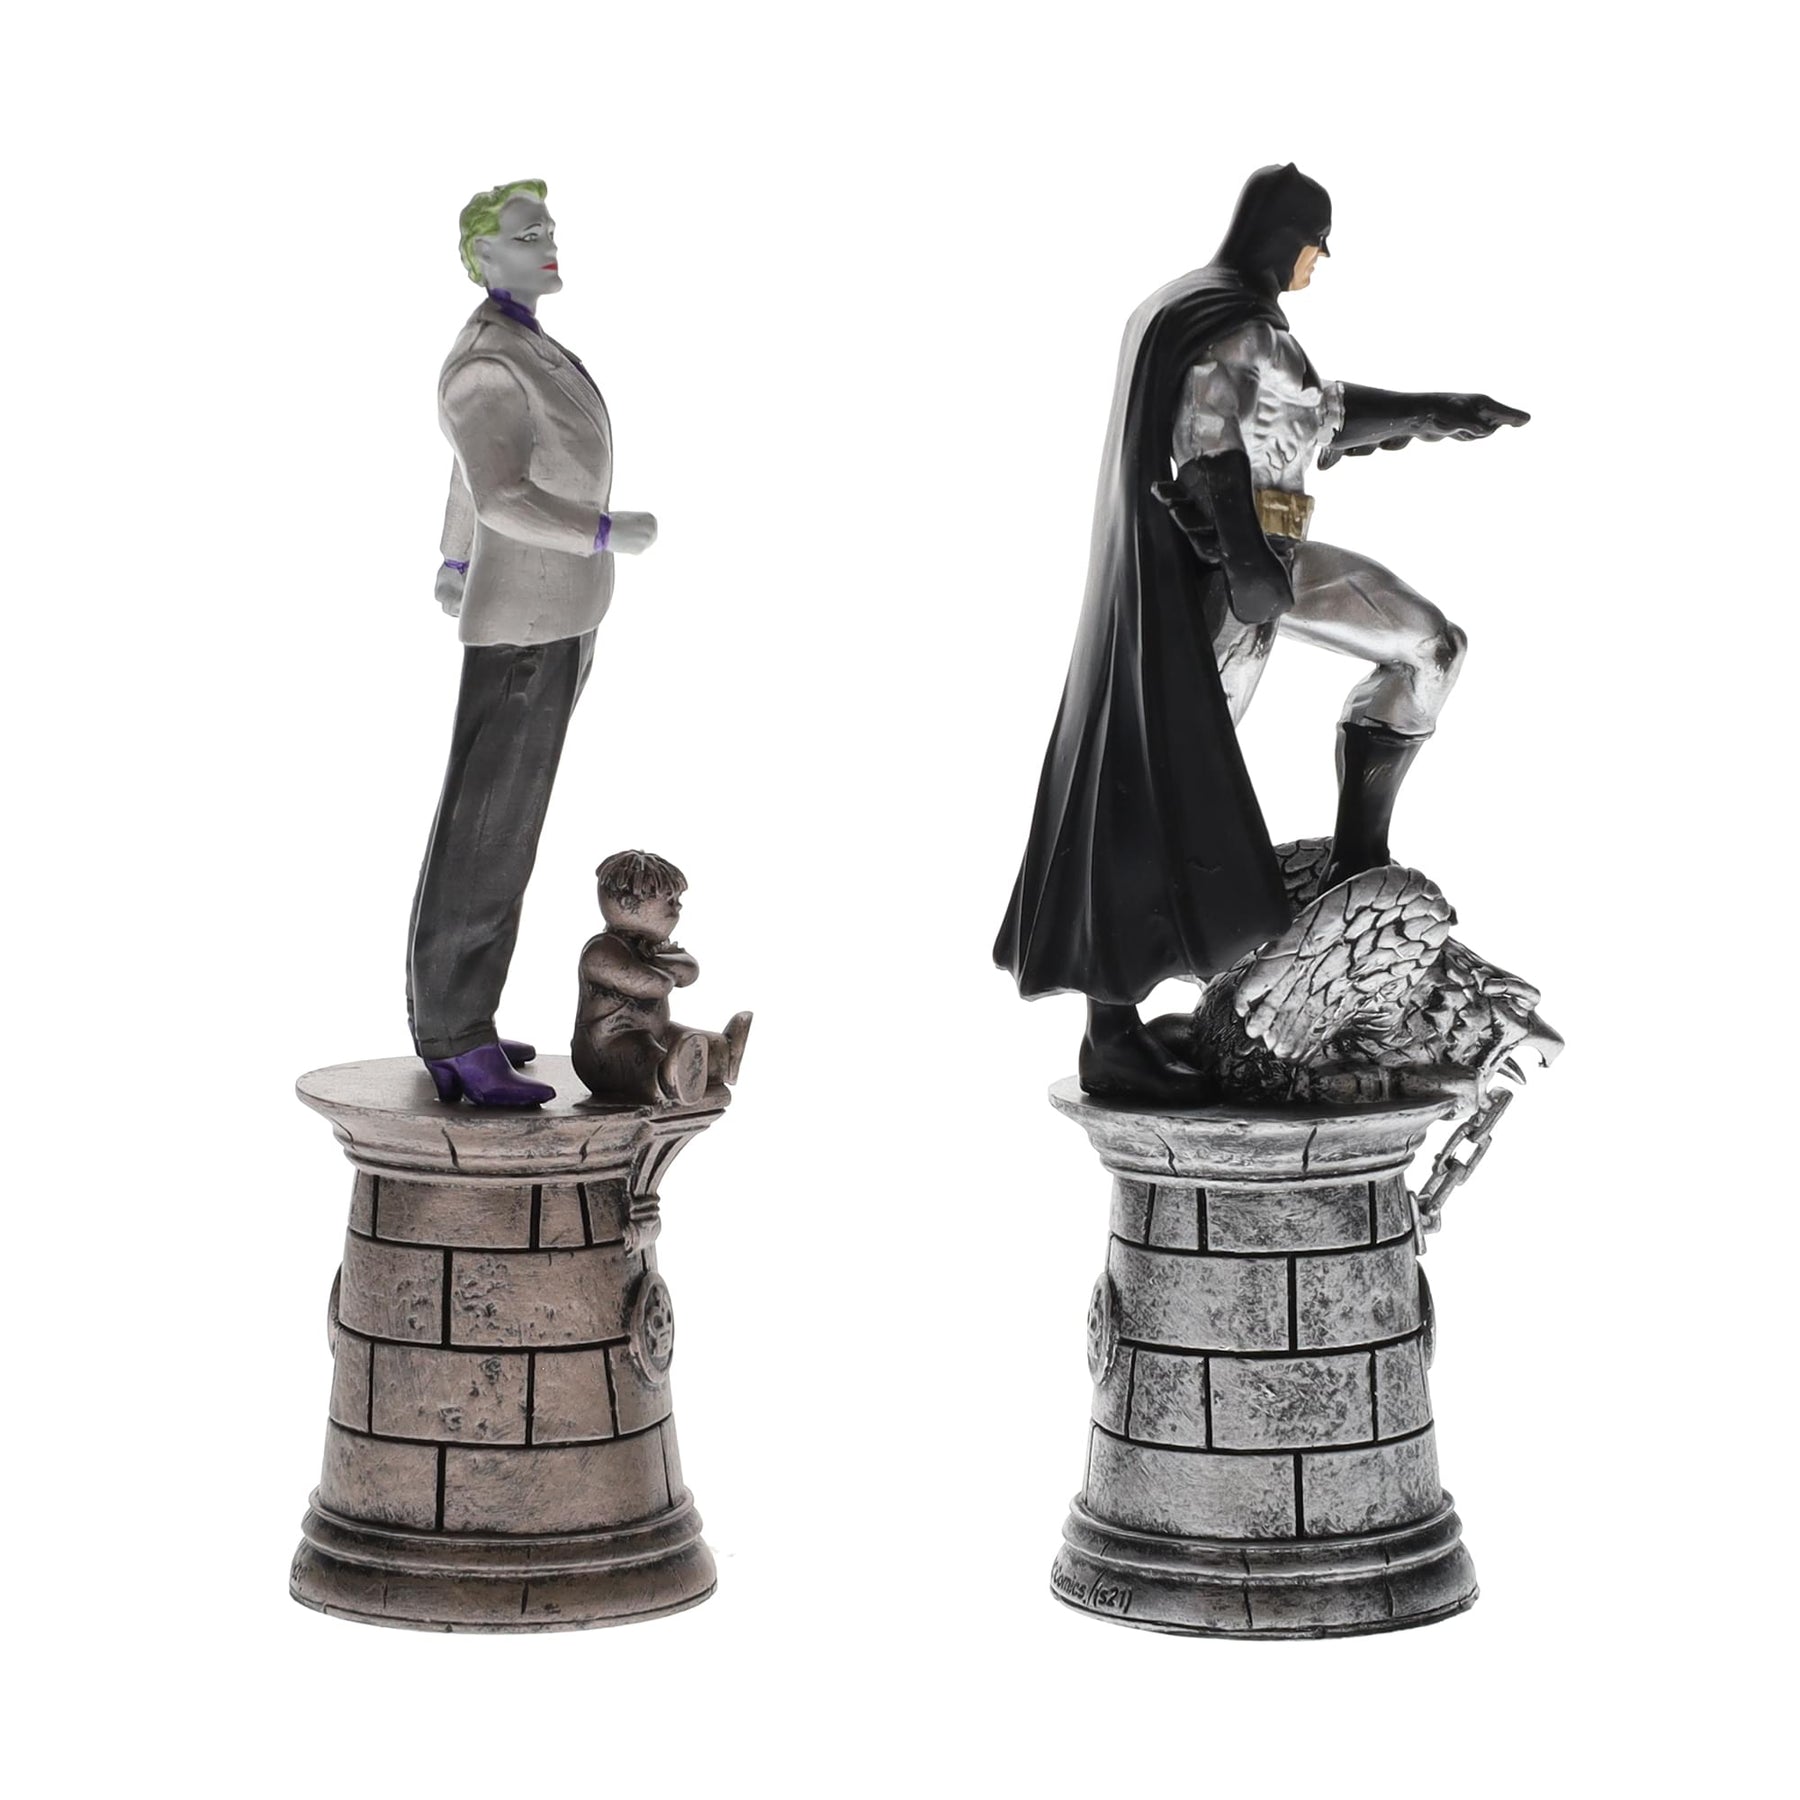 DC Chess Collection Special #1 Batman & Joker (Kings) | Chess Pieces Only